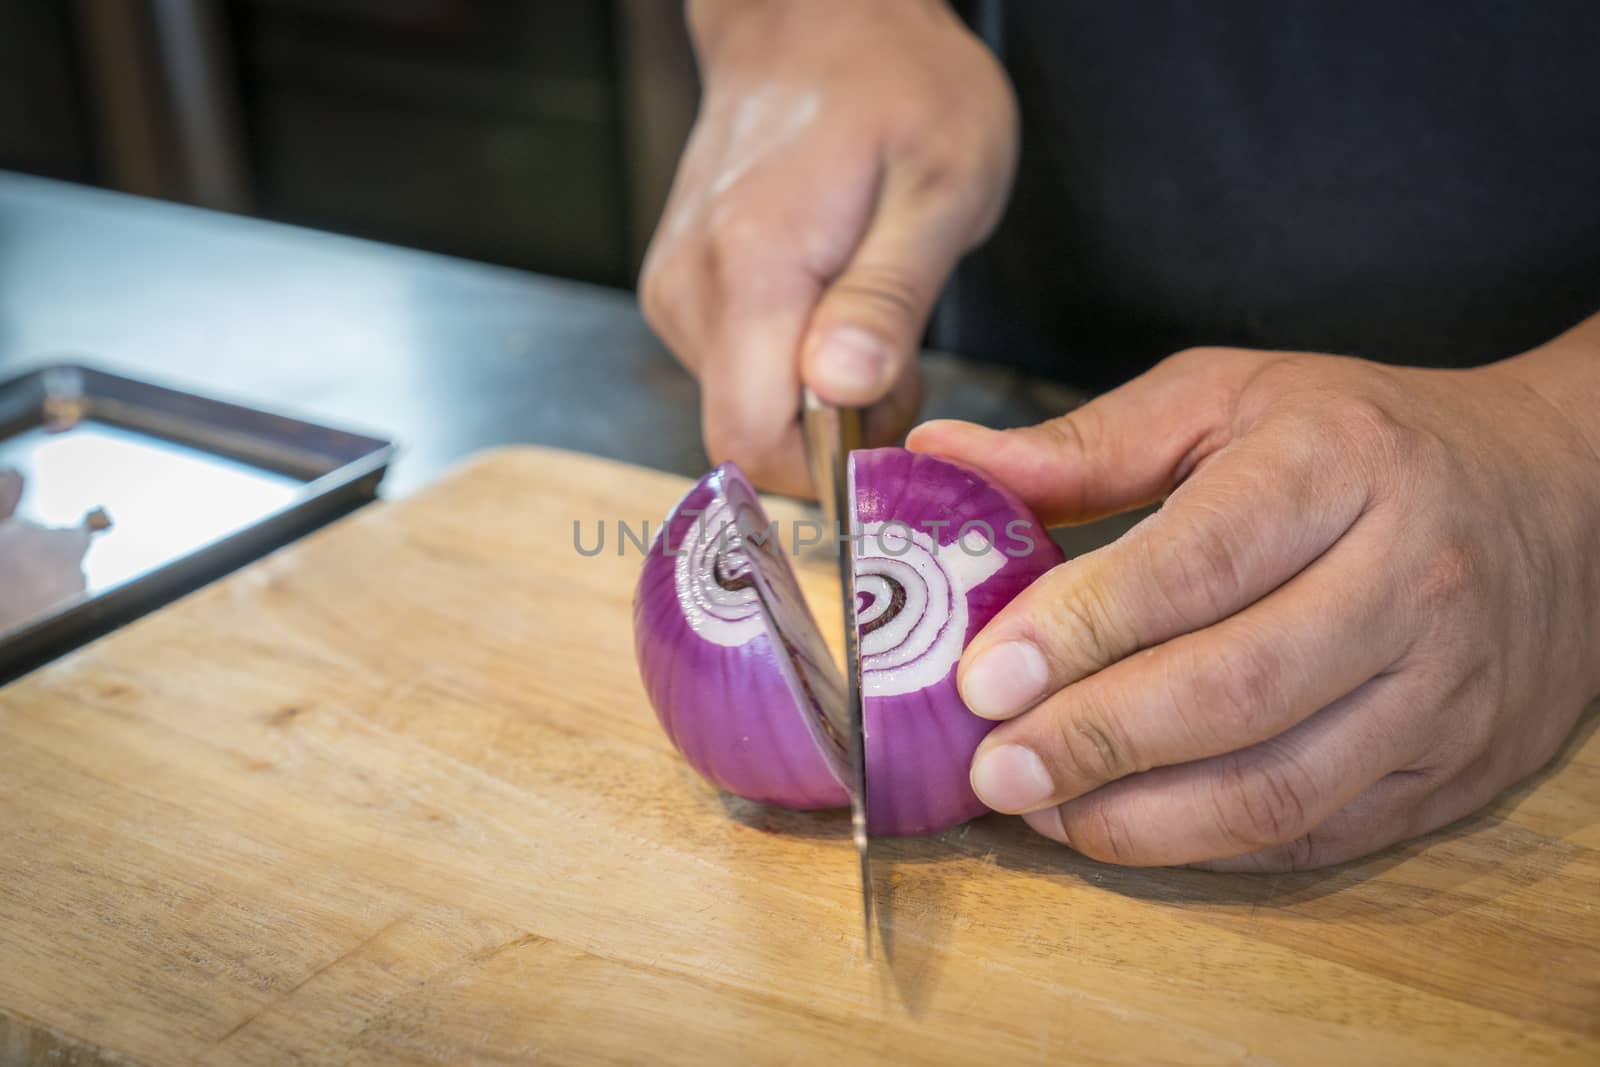 Chef chopping a red onion with a knife on the cutting board.